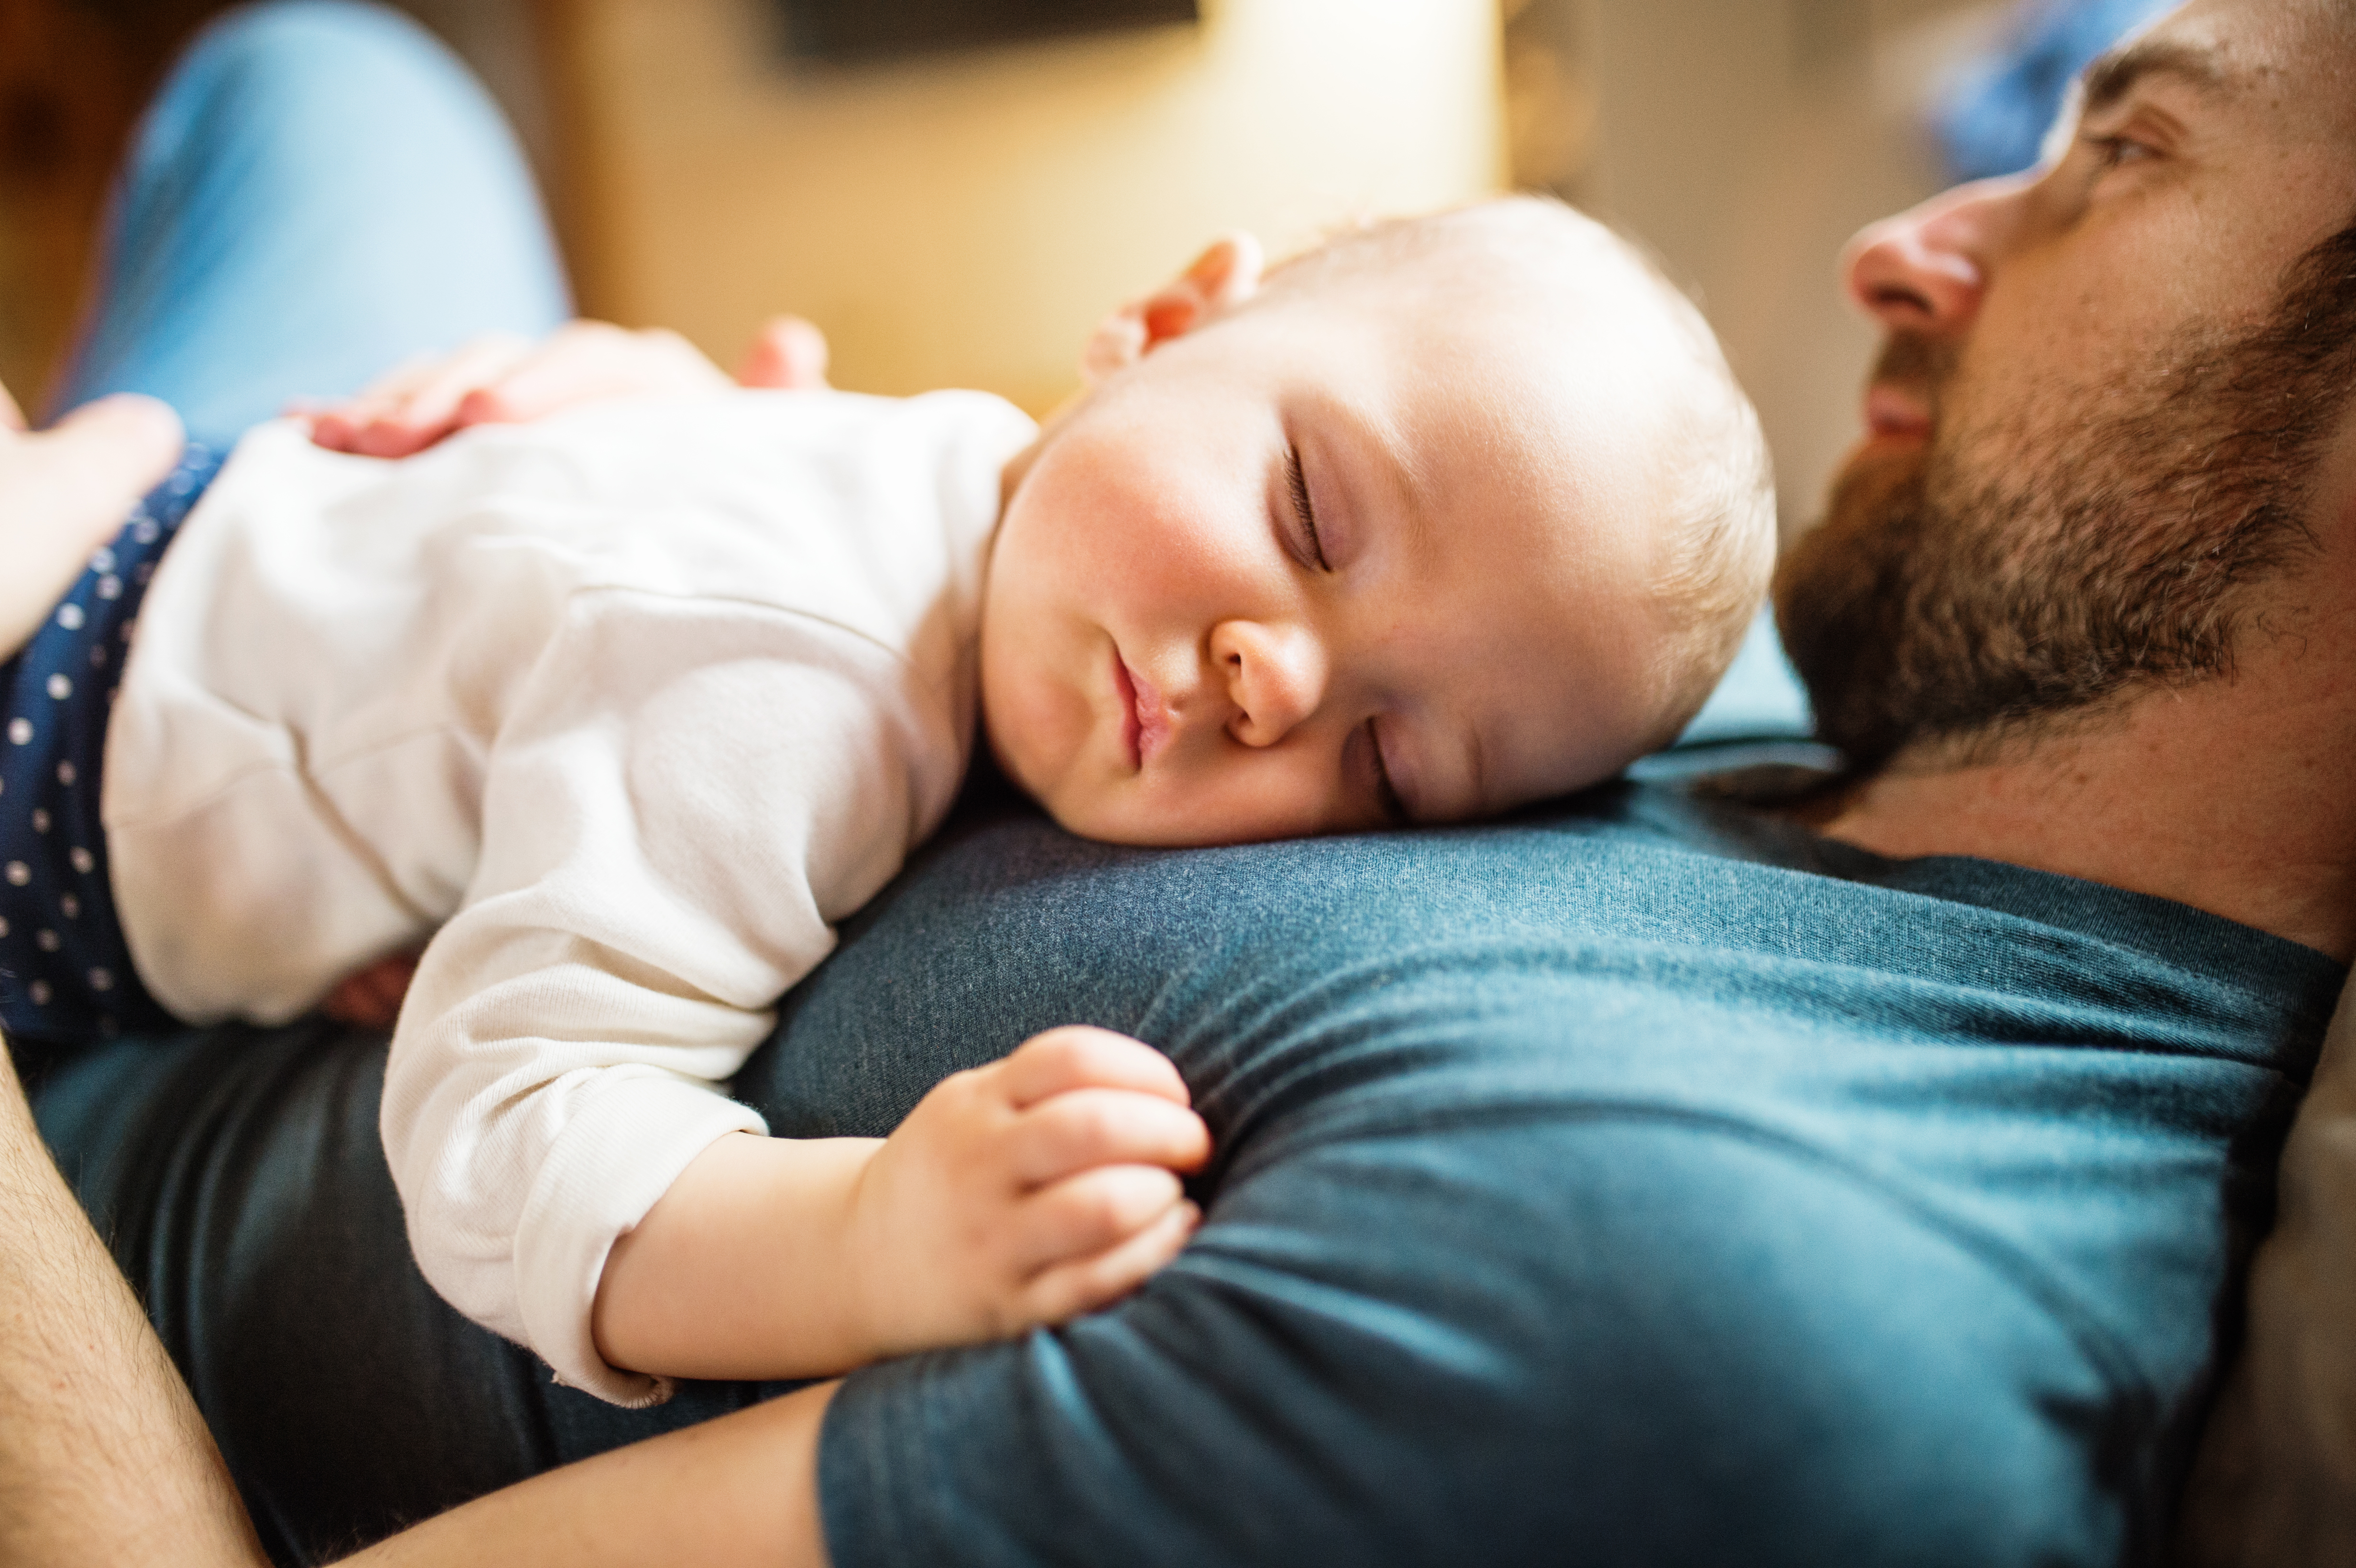 A baby sleeping on a man's chest | Source: Shutterstock